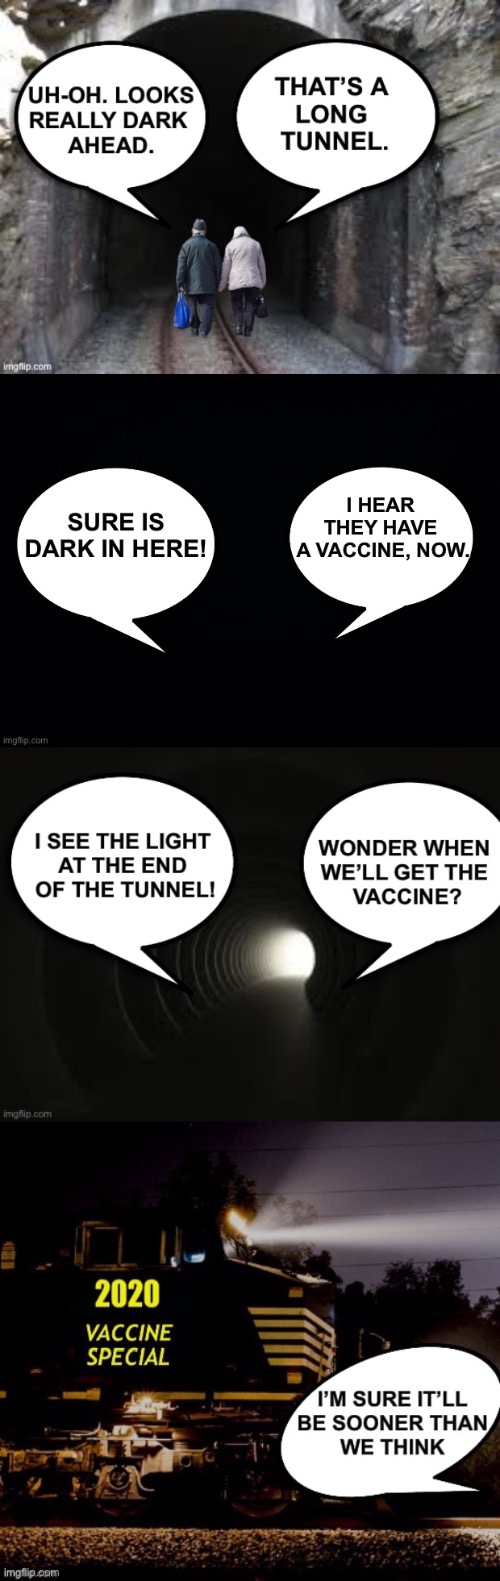 Seeking the Old Normal | image tagged in covid19,vaccine,normal | made w/ Imgflip meme maker